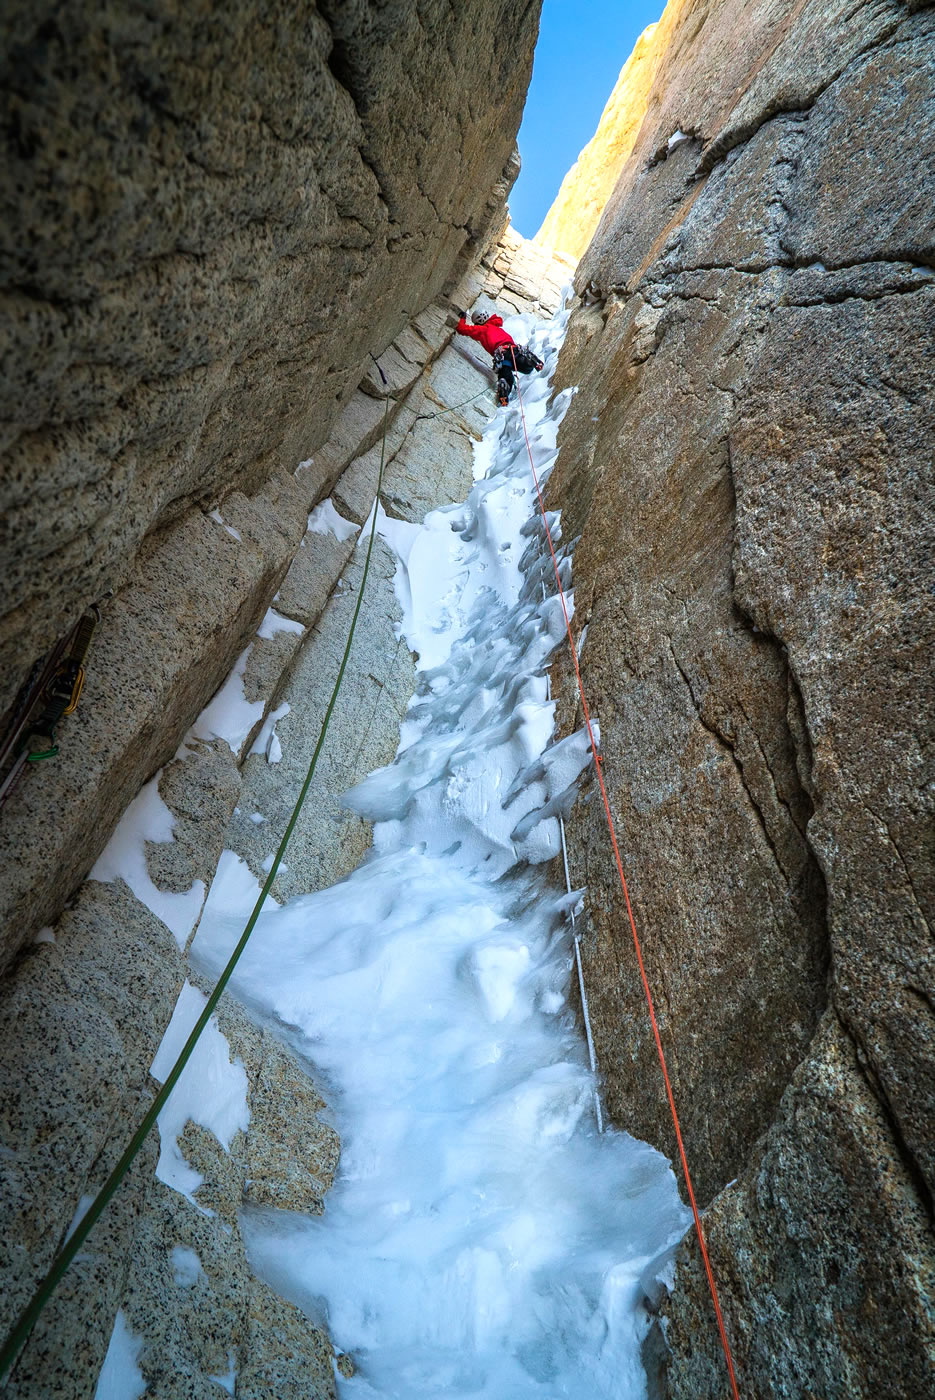 Marc-Andre Leclerc leads one of the pitches of the unrepeated six-pitch ice runnel in the bottom half of Titanic (7b M5 WI4 950m) on Torre Egger (2850m) during his all-free two-day ascent. [Photo] Austin Siadak